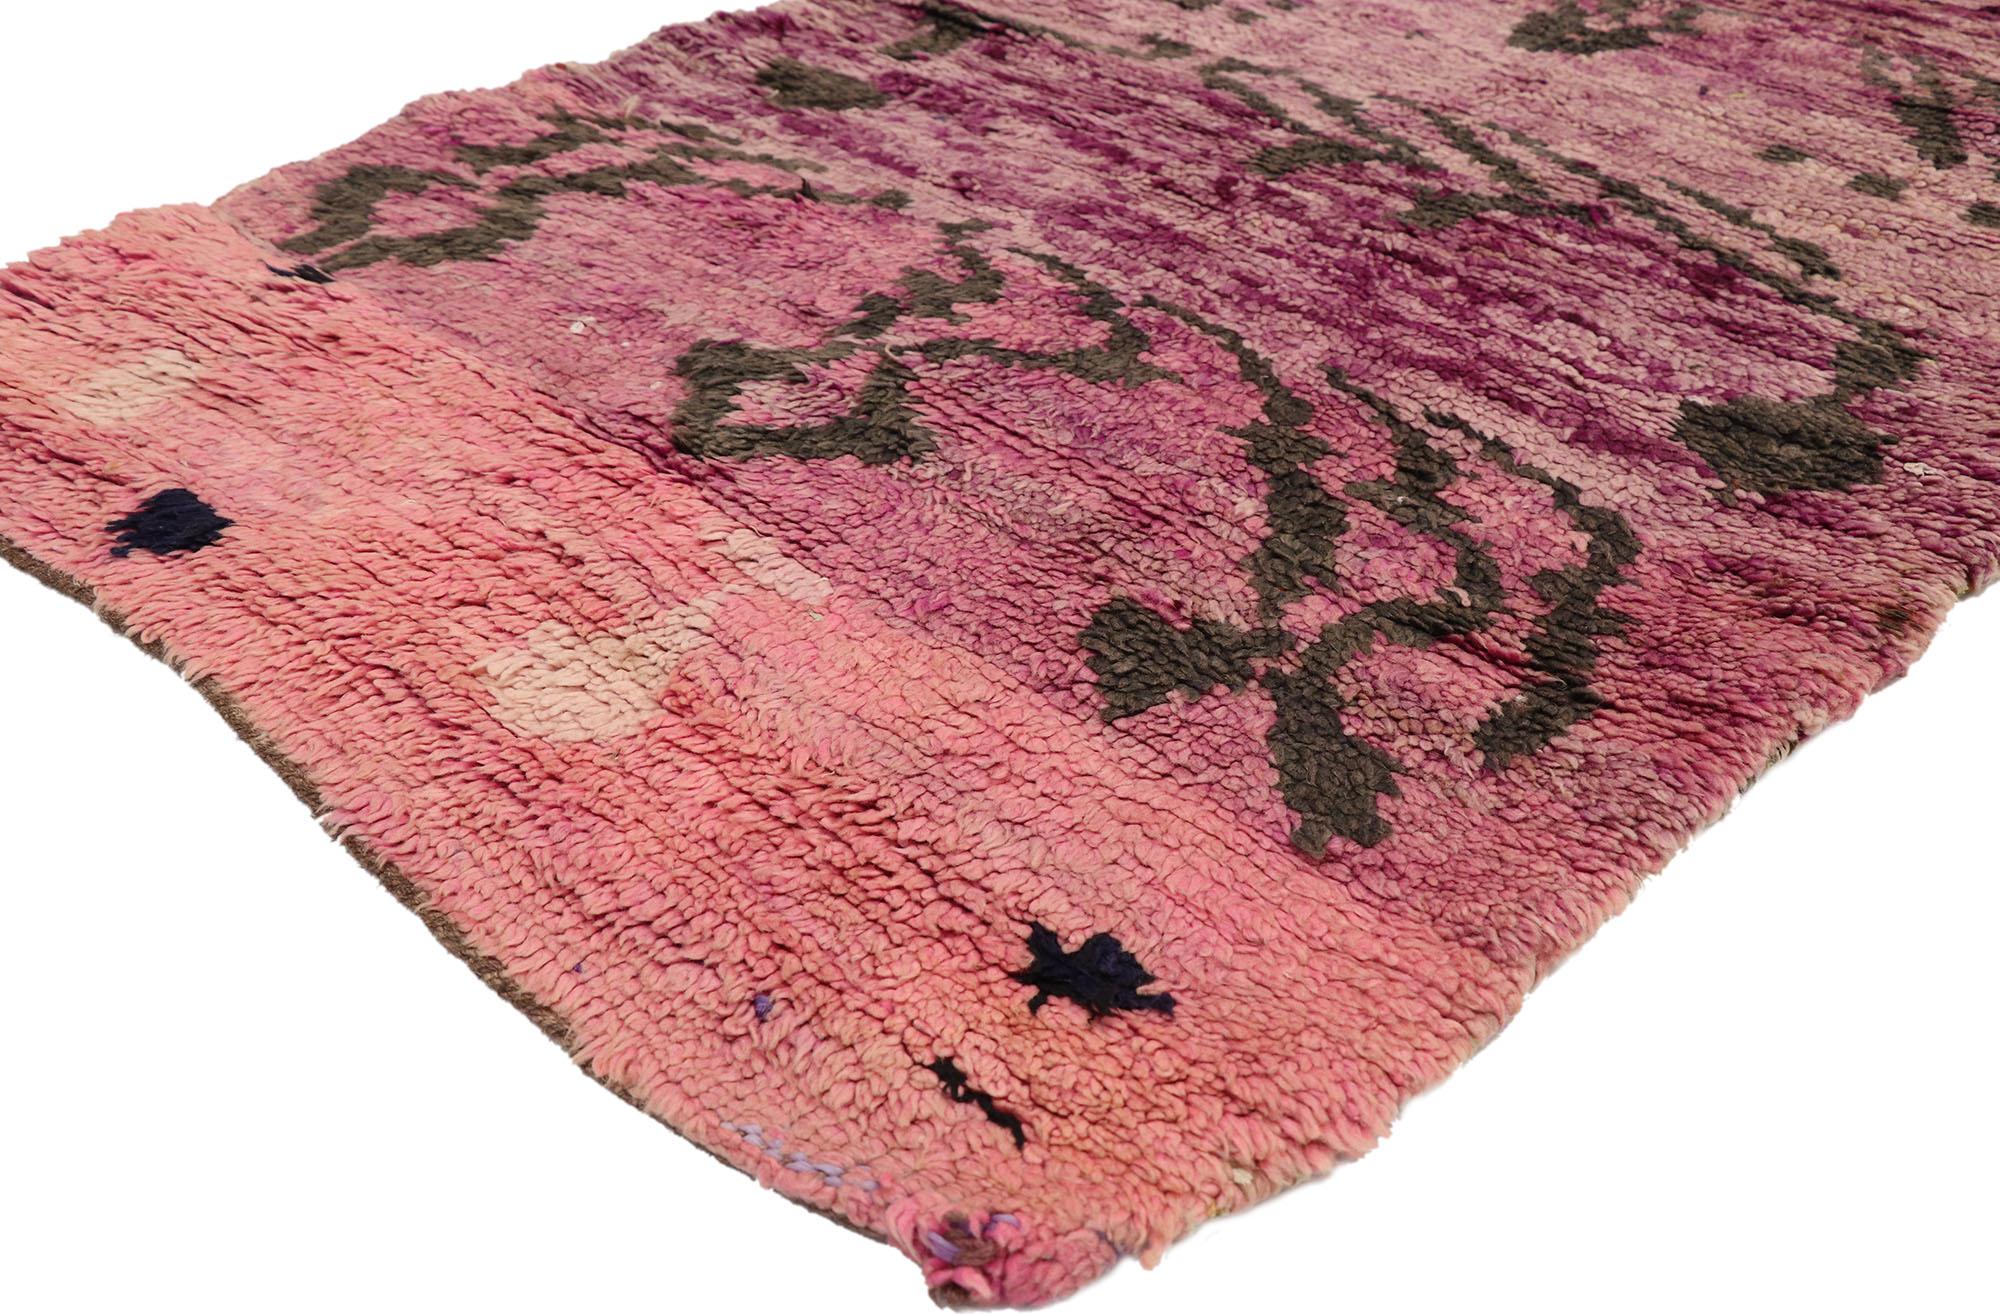 21002, vintage Berber Moroccan Talsint rug with Memphis design, Shag Hallway runner. Displaying asymmetrical spontaneity and gorgeous berry gradations with pink and plum colored striations, this hand knotted wool vintage Berber Moroccan runner